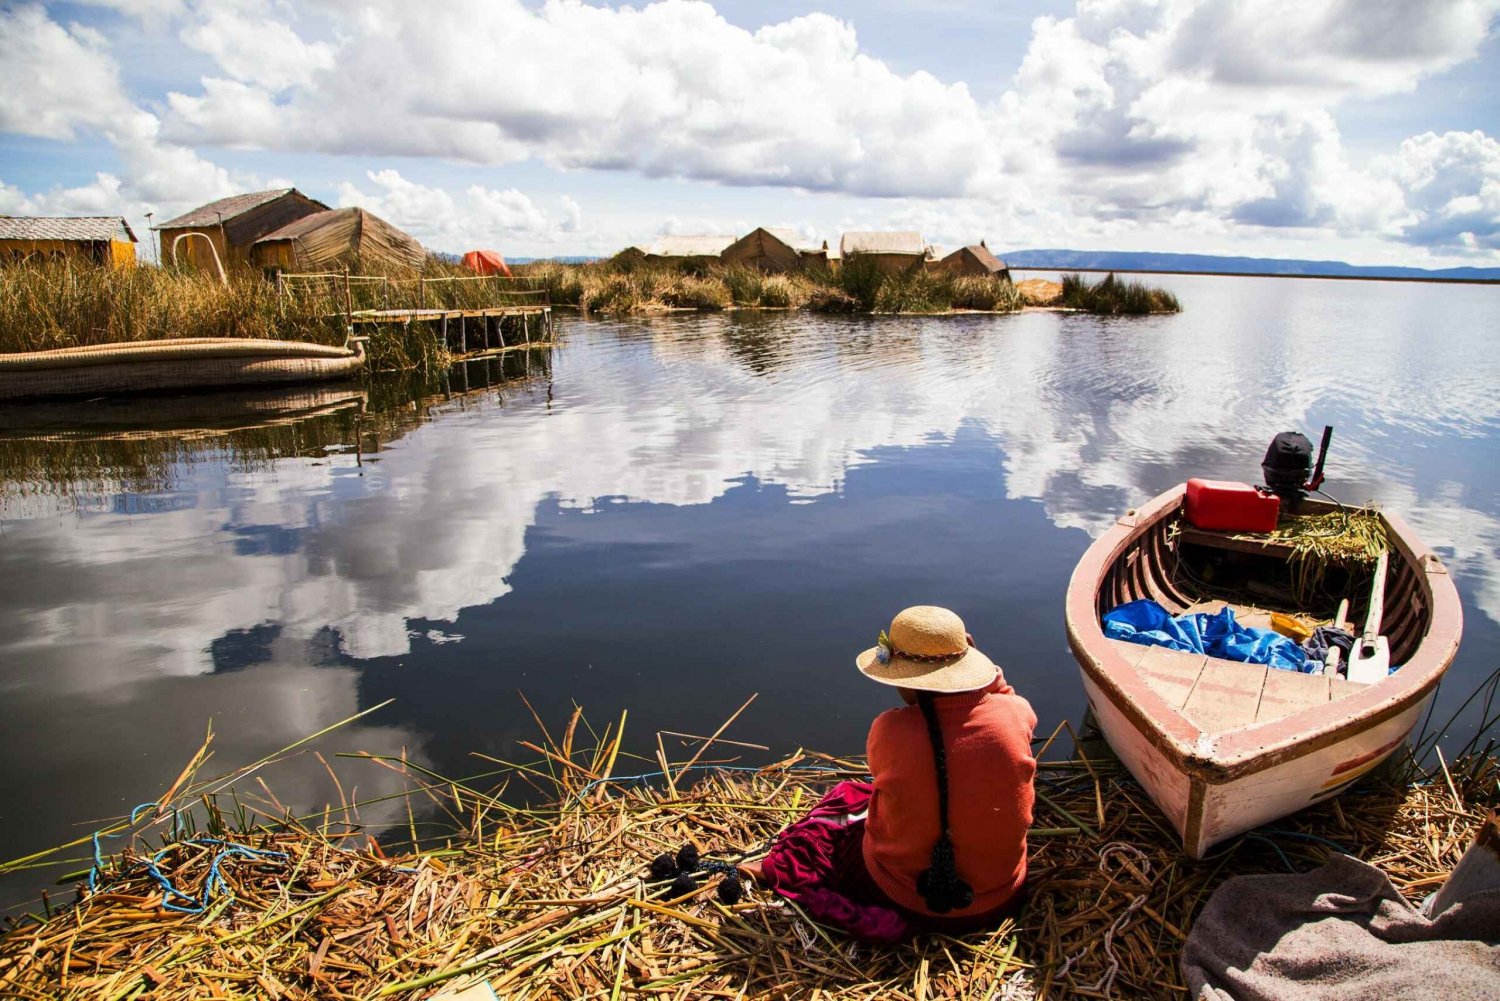 From Puno: Uros, Amantaní & Taquile Islands 2-Day Tour